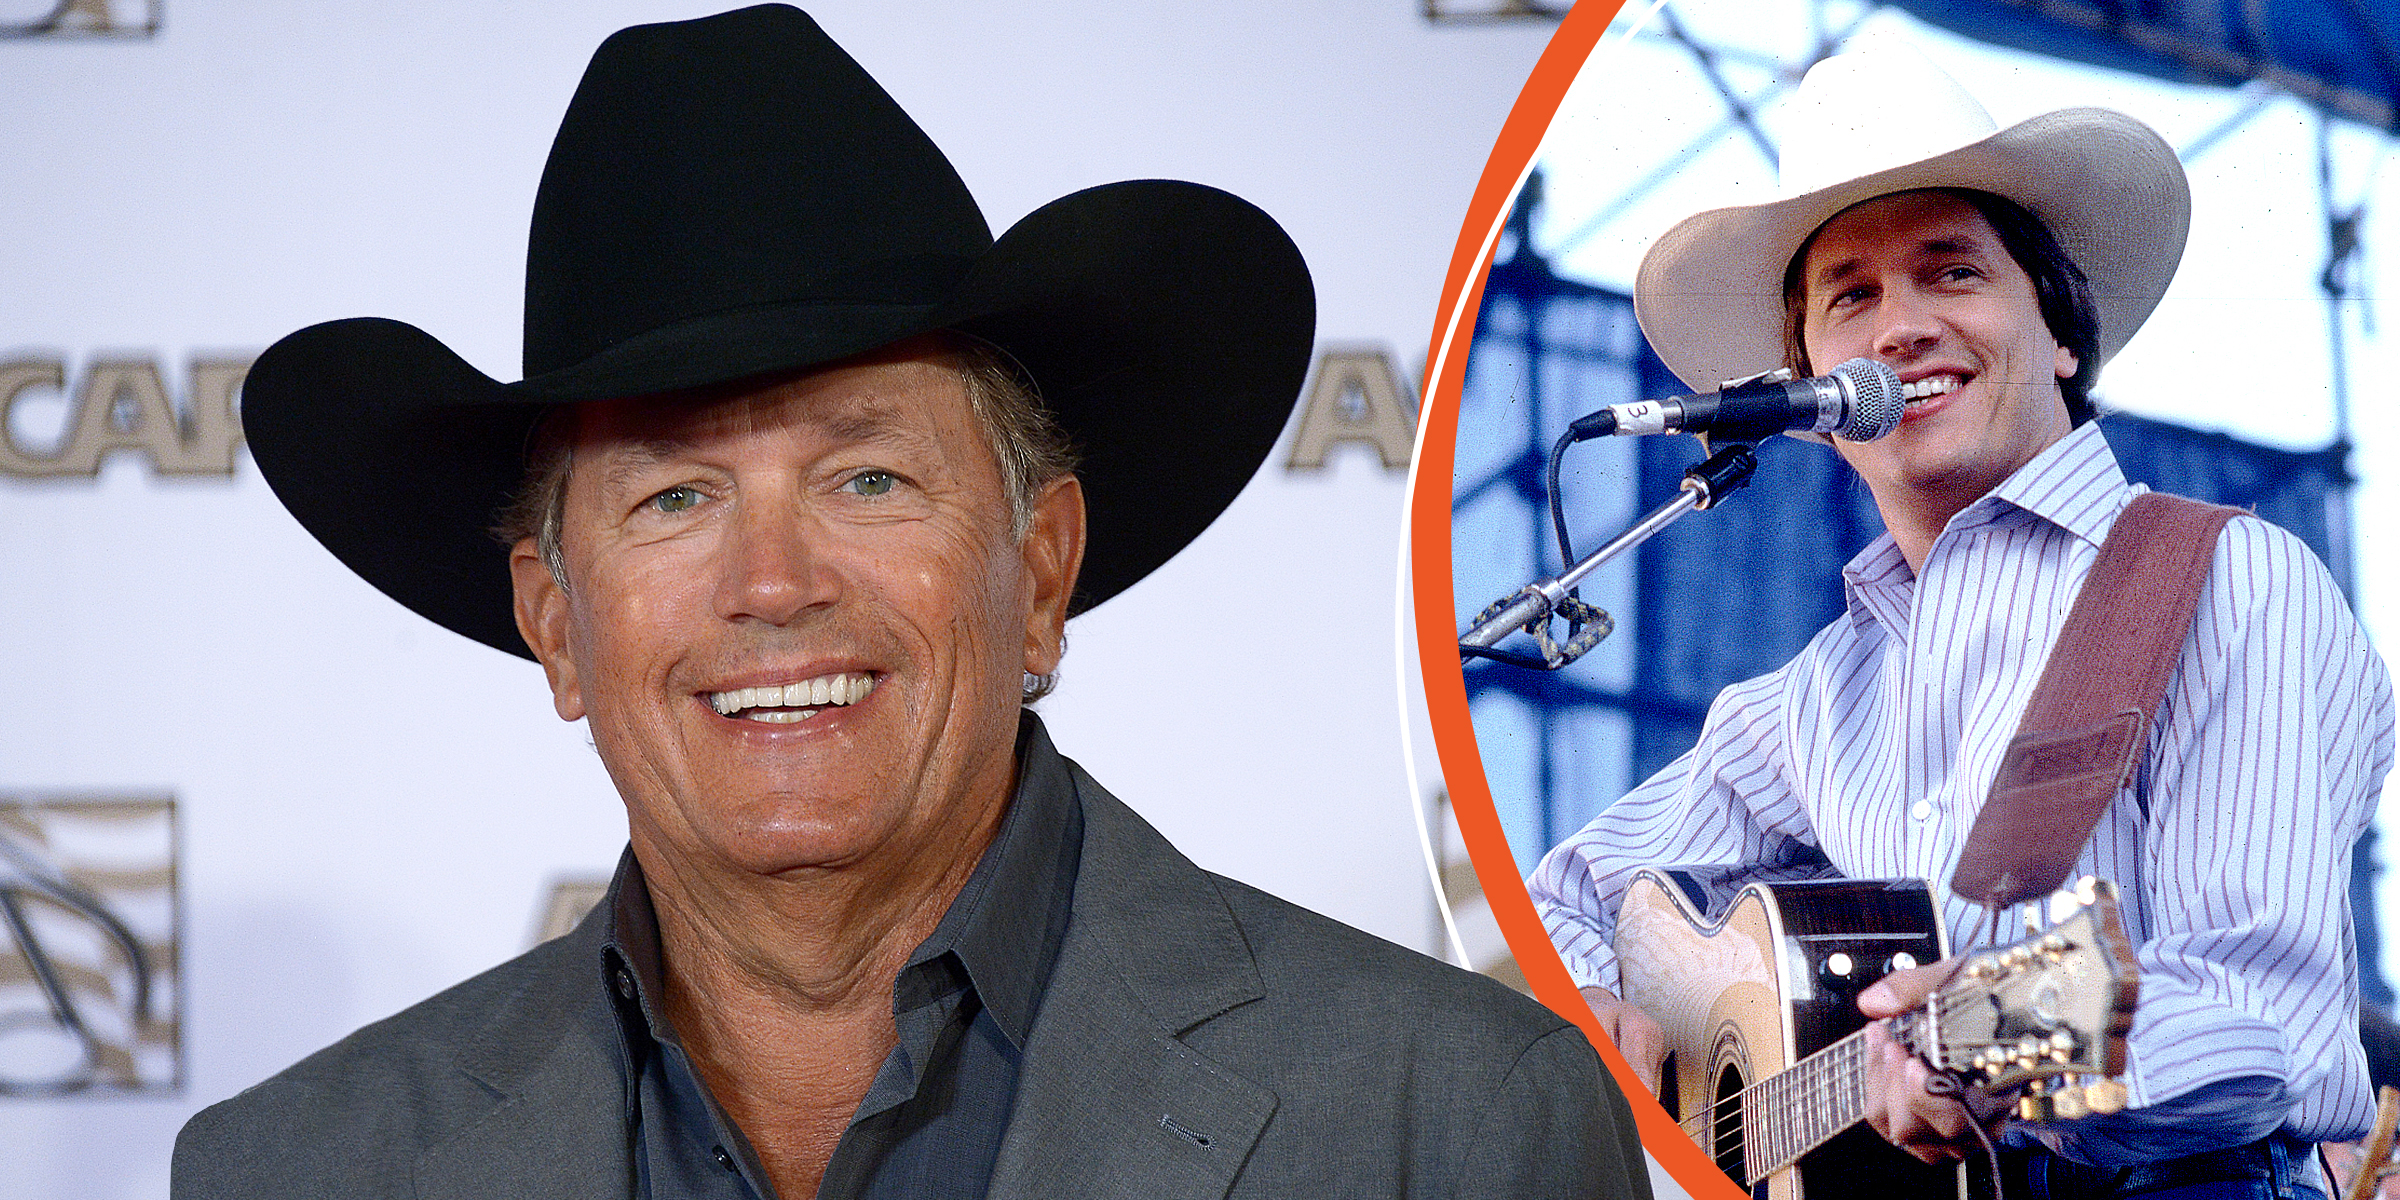 George Strait | Source: Getty Images